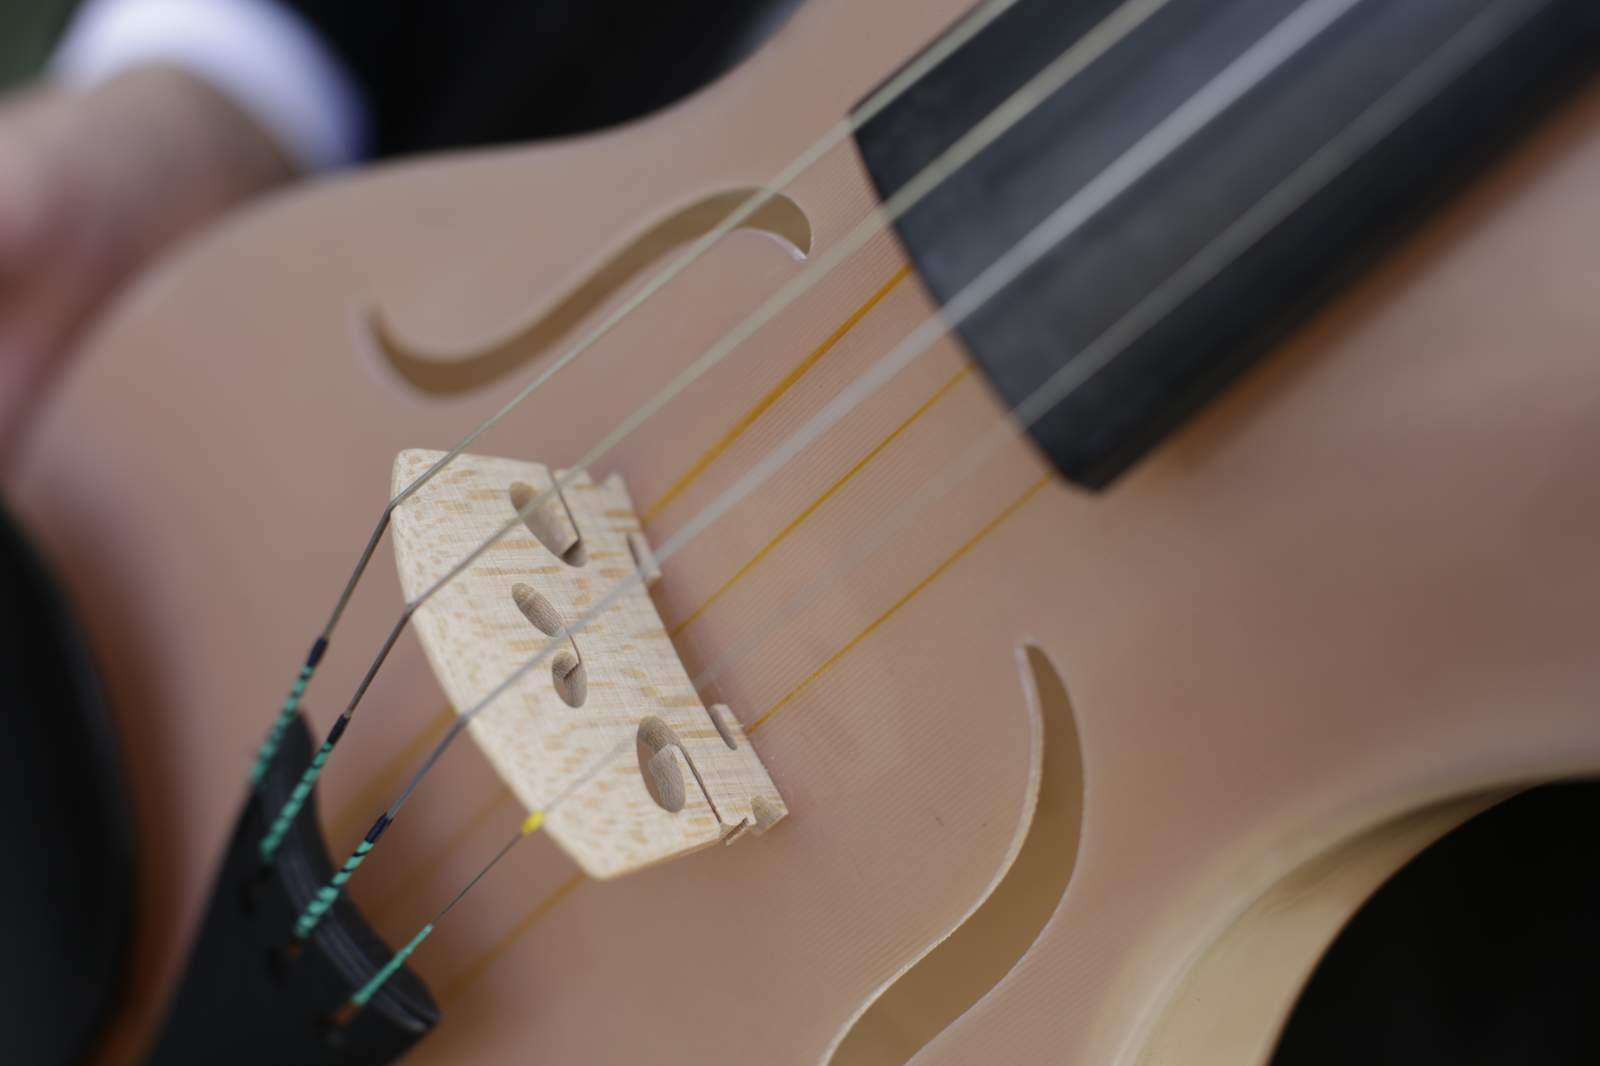 Luca's Violin made from composite material that includes spiders’ silk